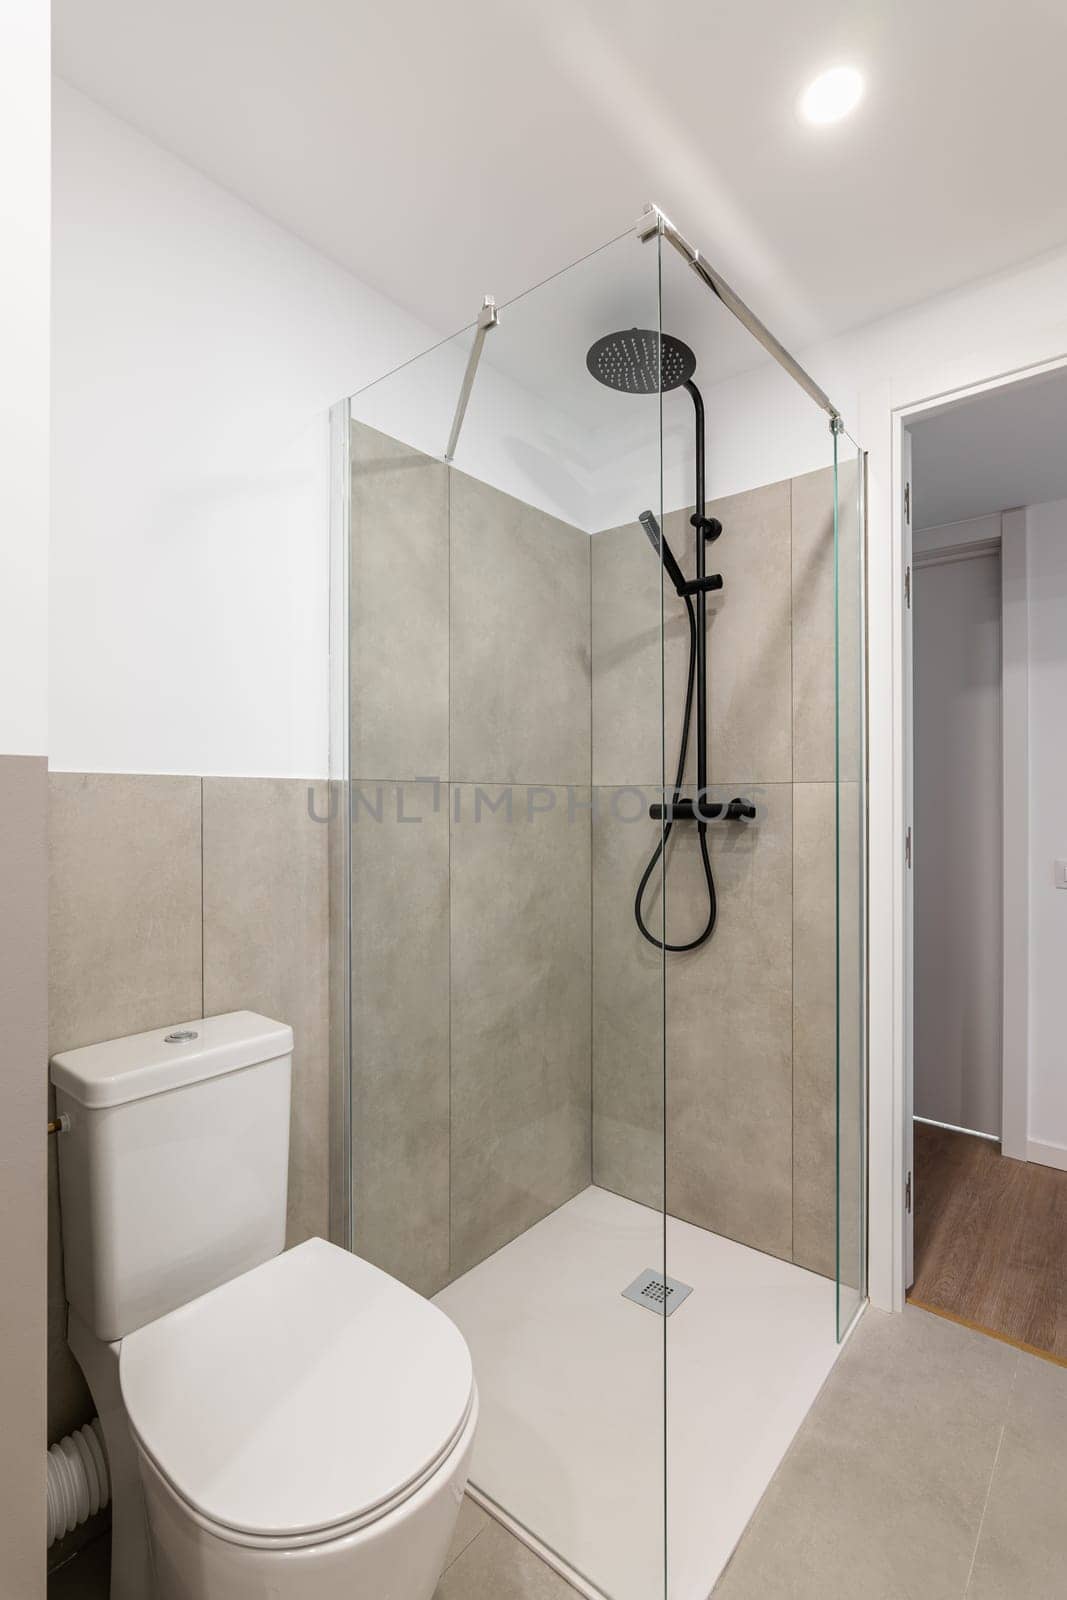 An empty tiny bathroom with a toilet and a glazed shower with gray tiles. The concept of a simple and stylish bathroom in an apartment or luxury hotel by apavlin